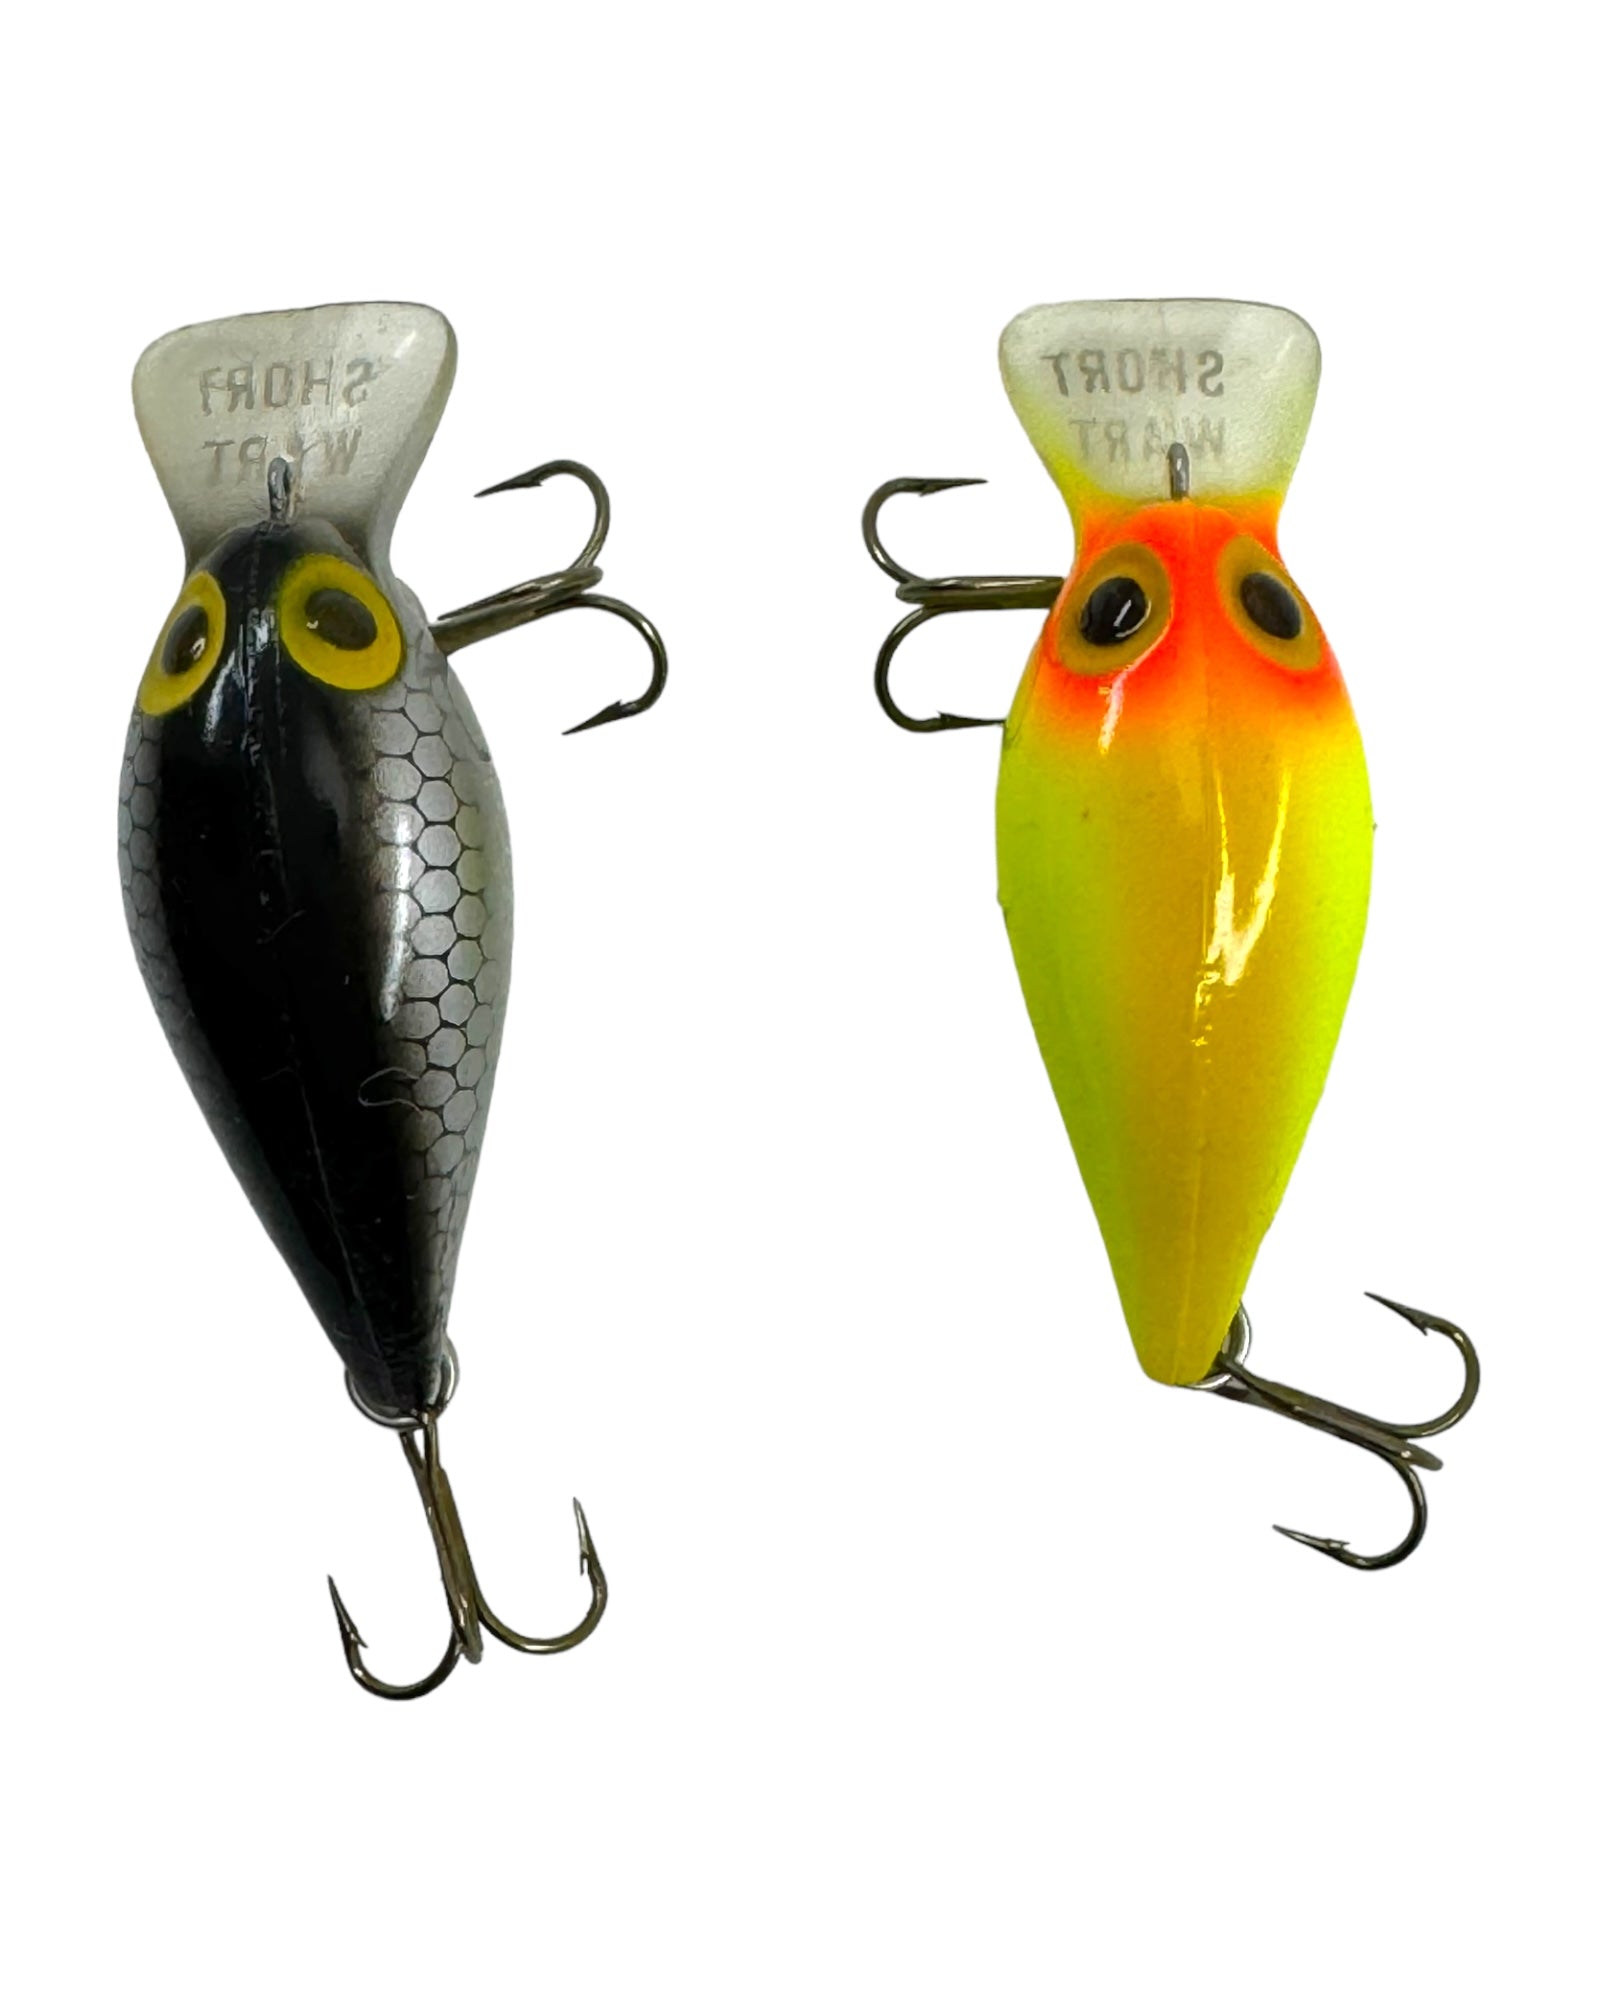 Lot of 2 • STORM LURES SHORT WART Fishing Lure • FV36 & FV74 – Toad Tackle